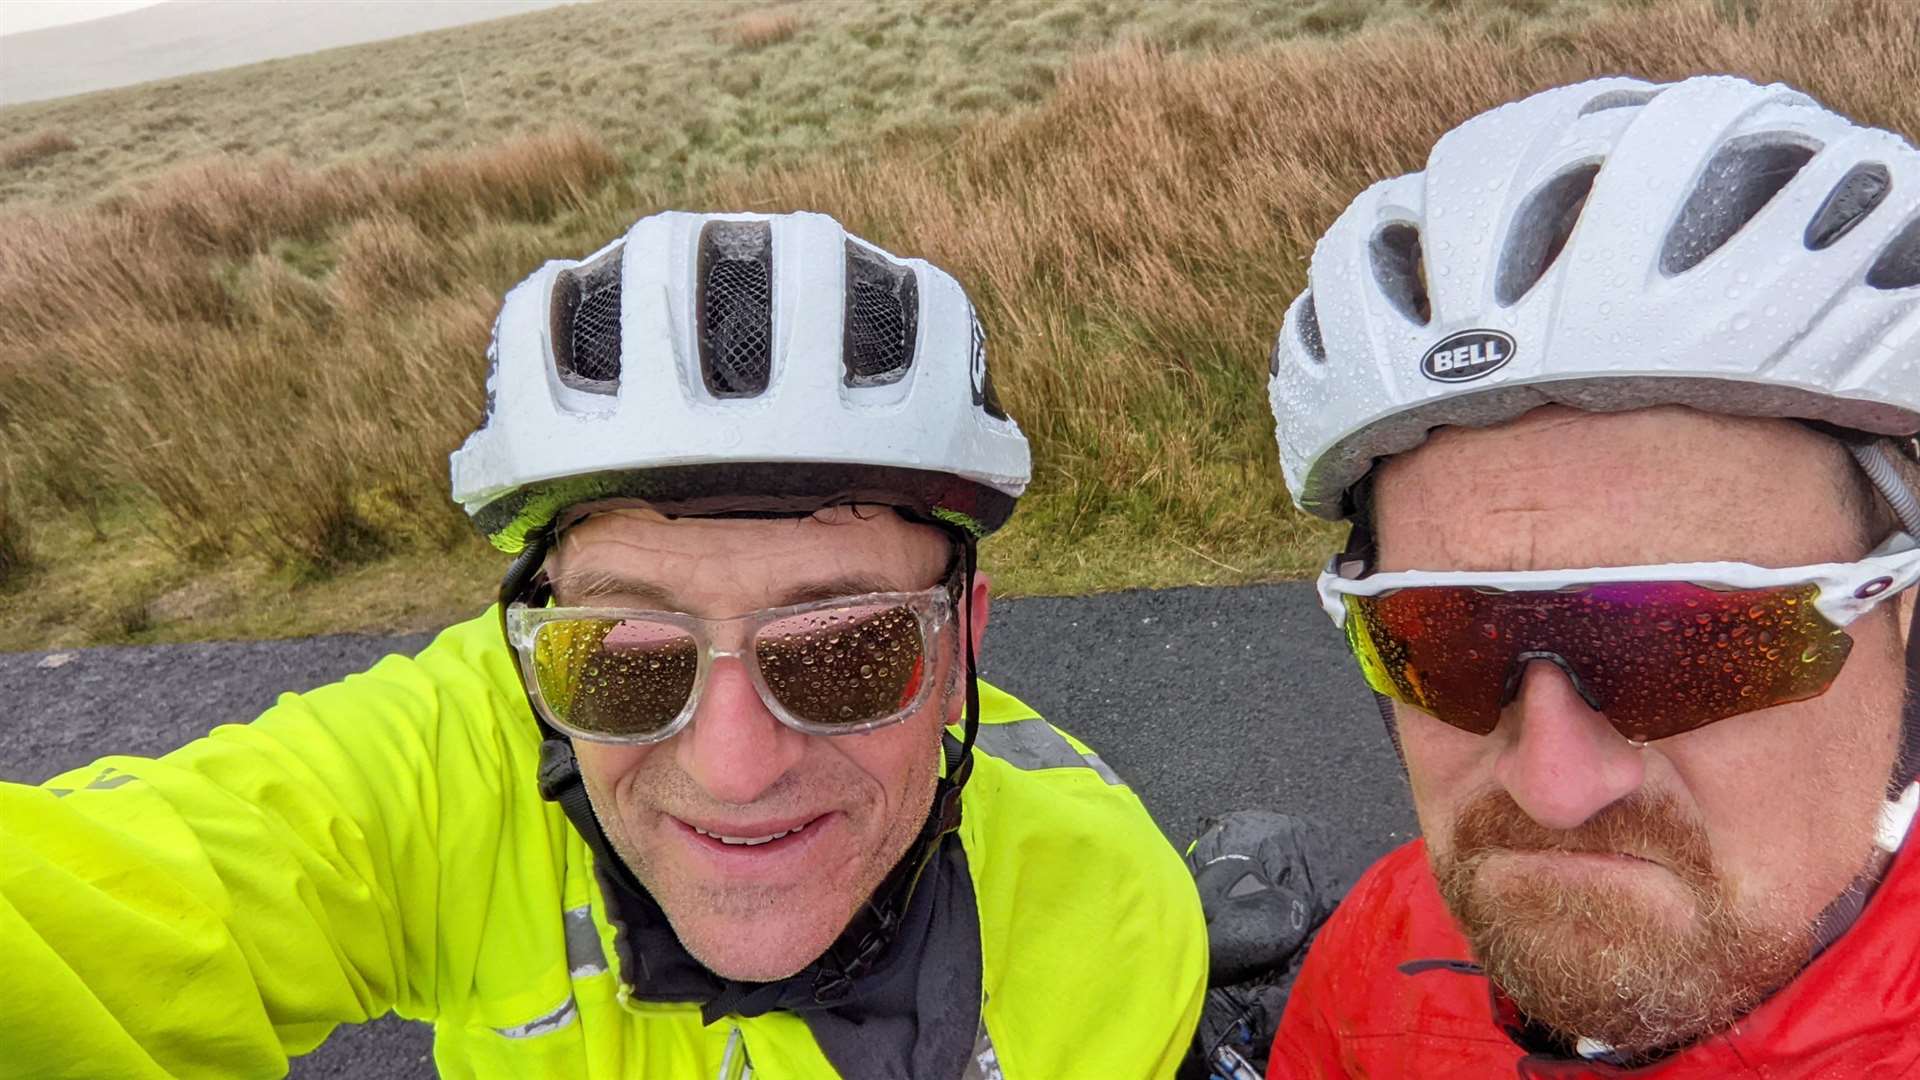 Charity cyclists James Graham (left) and Tom Shearman getting soaked in the Pennines two days before Tom had to pull out of the journey.